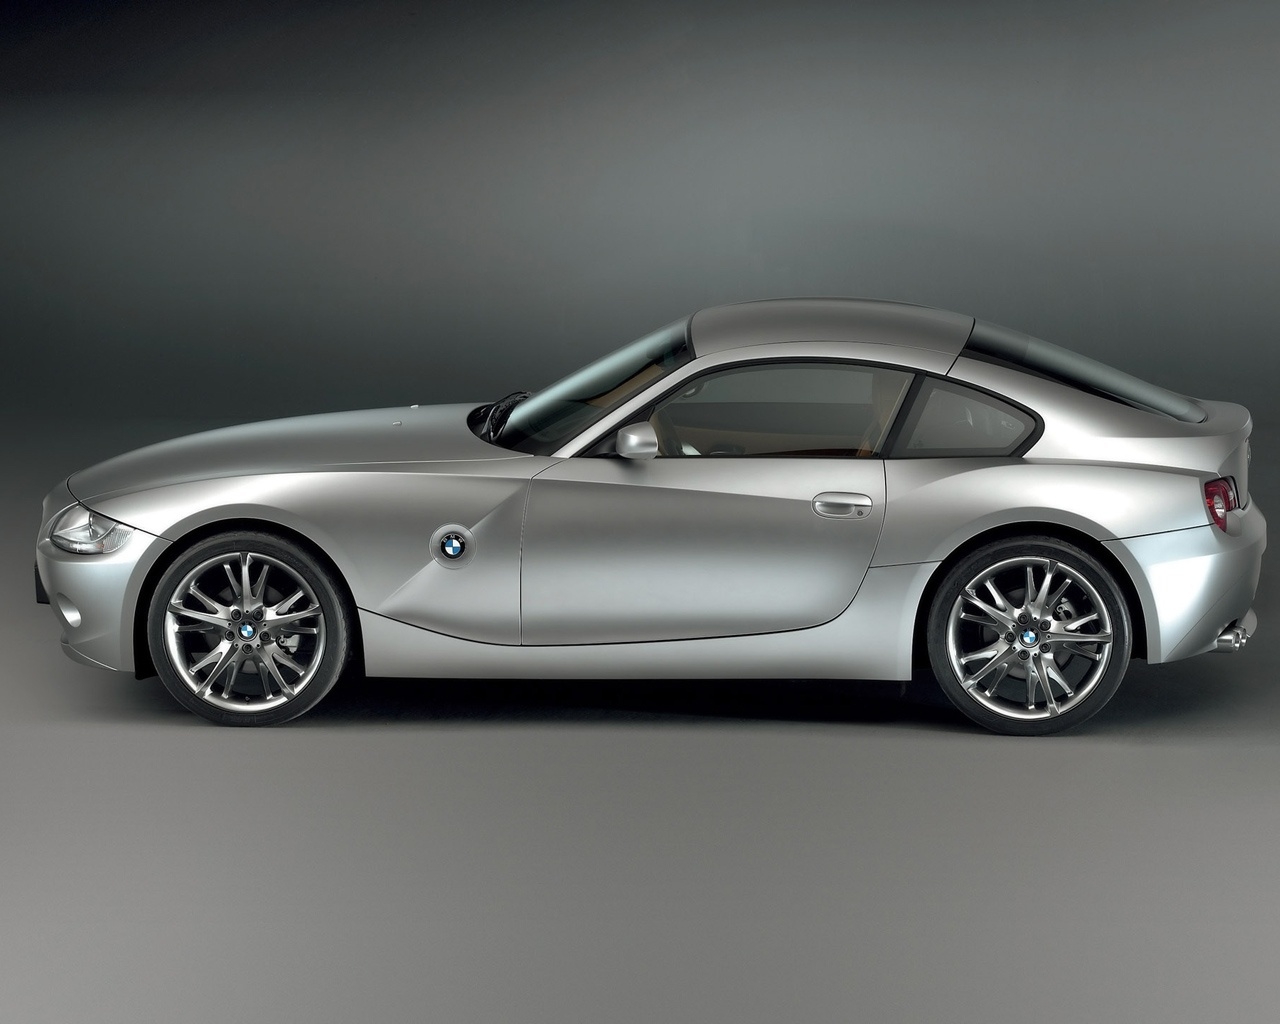 BMW Z4 Coupe Concept S Studio for 1280 x 1024 resolution